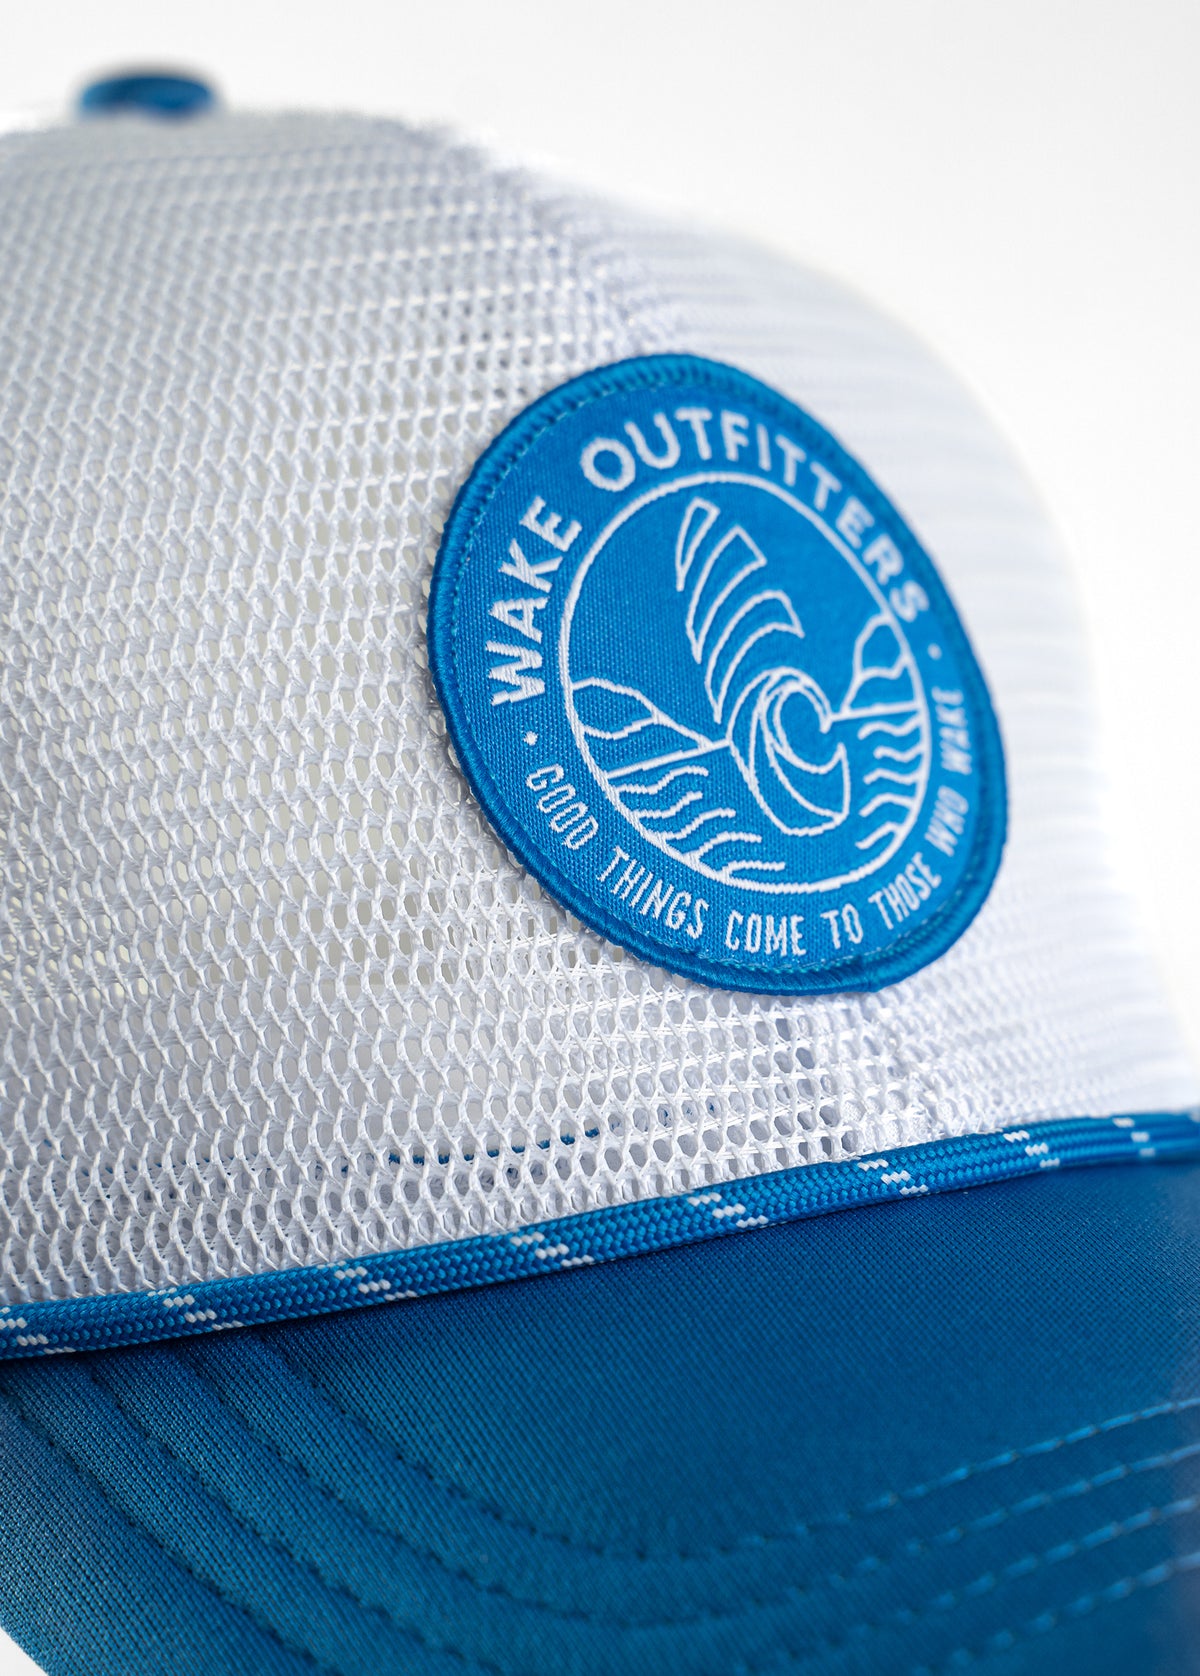 Wake Outfitters Full Mesh Hat - Royal Breeze